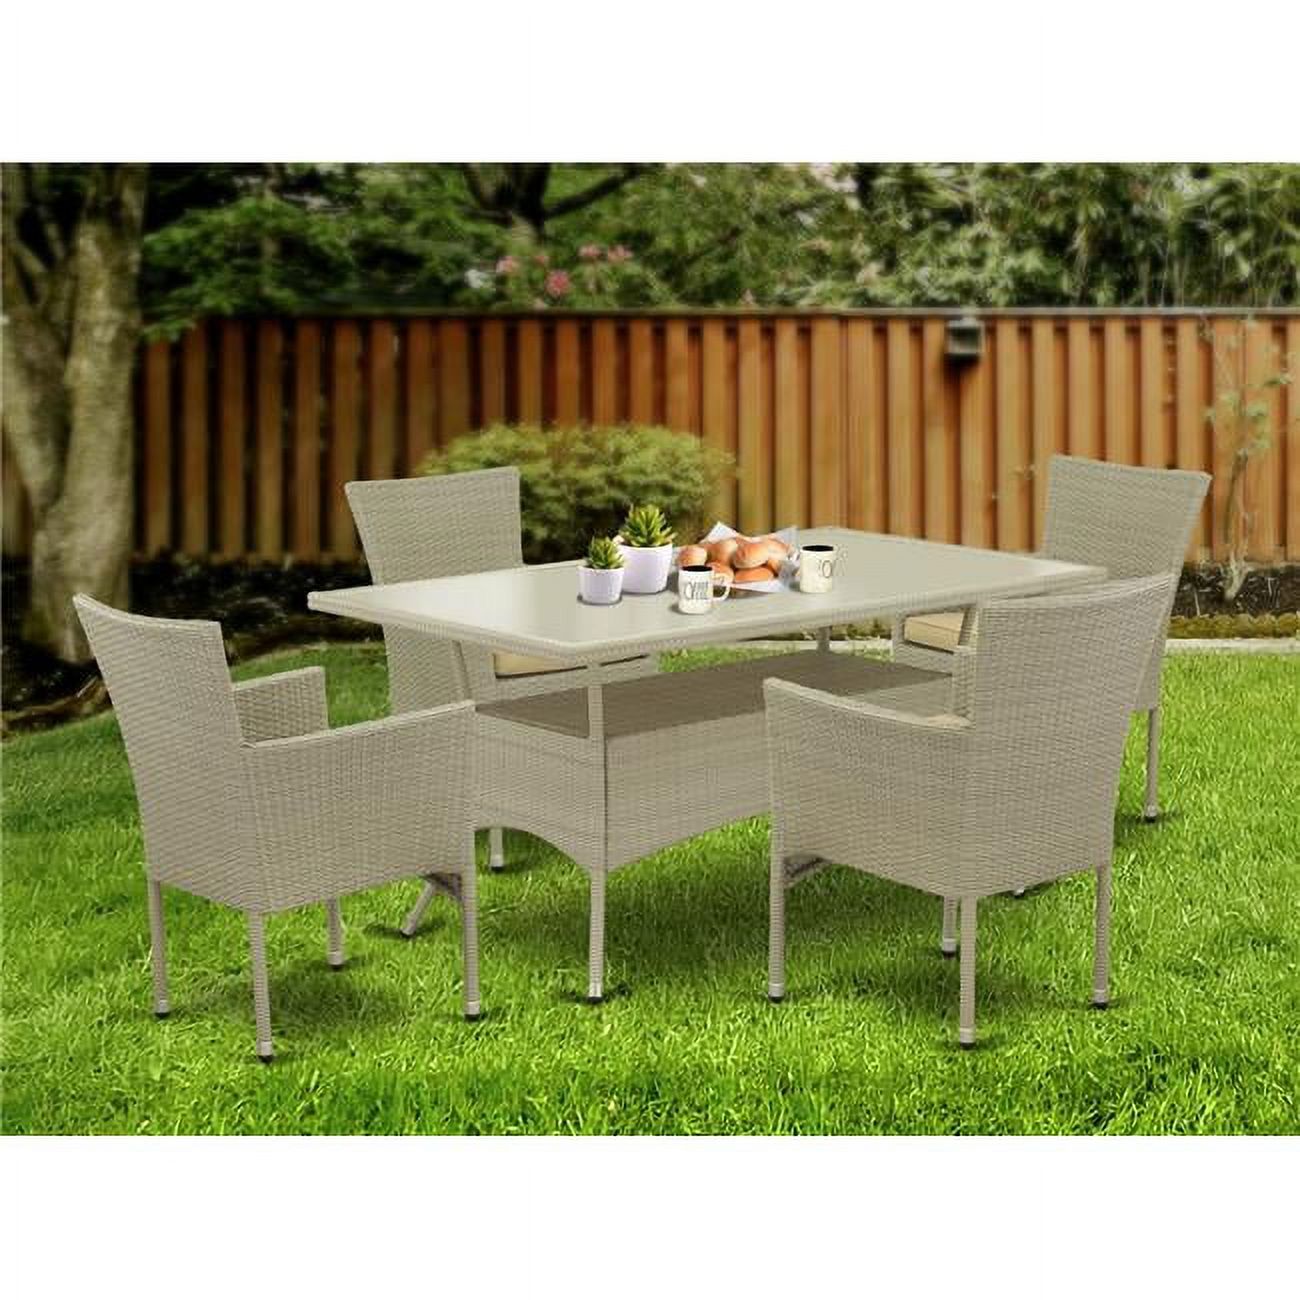 East West Furniture Oslo 5-piece Modern Metal Patio Set in Natural - image 1 of 4